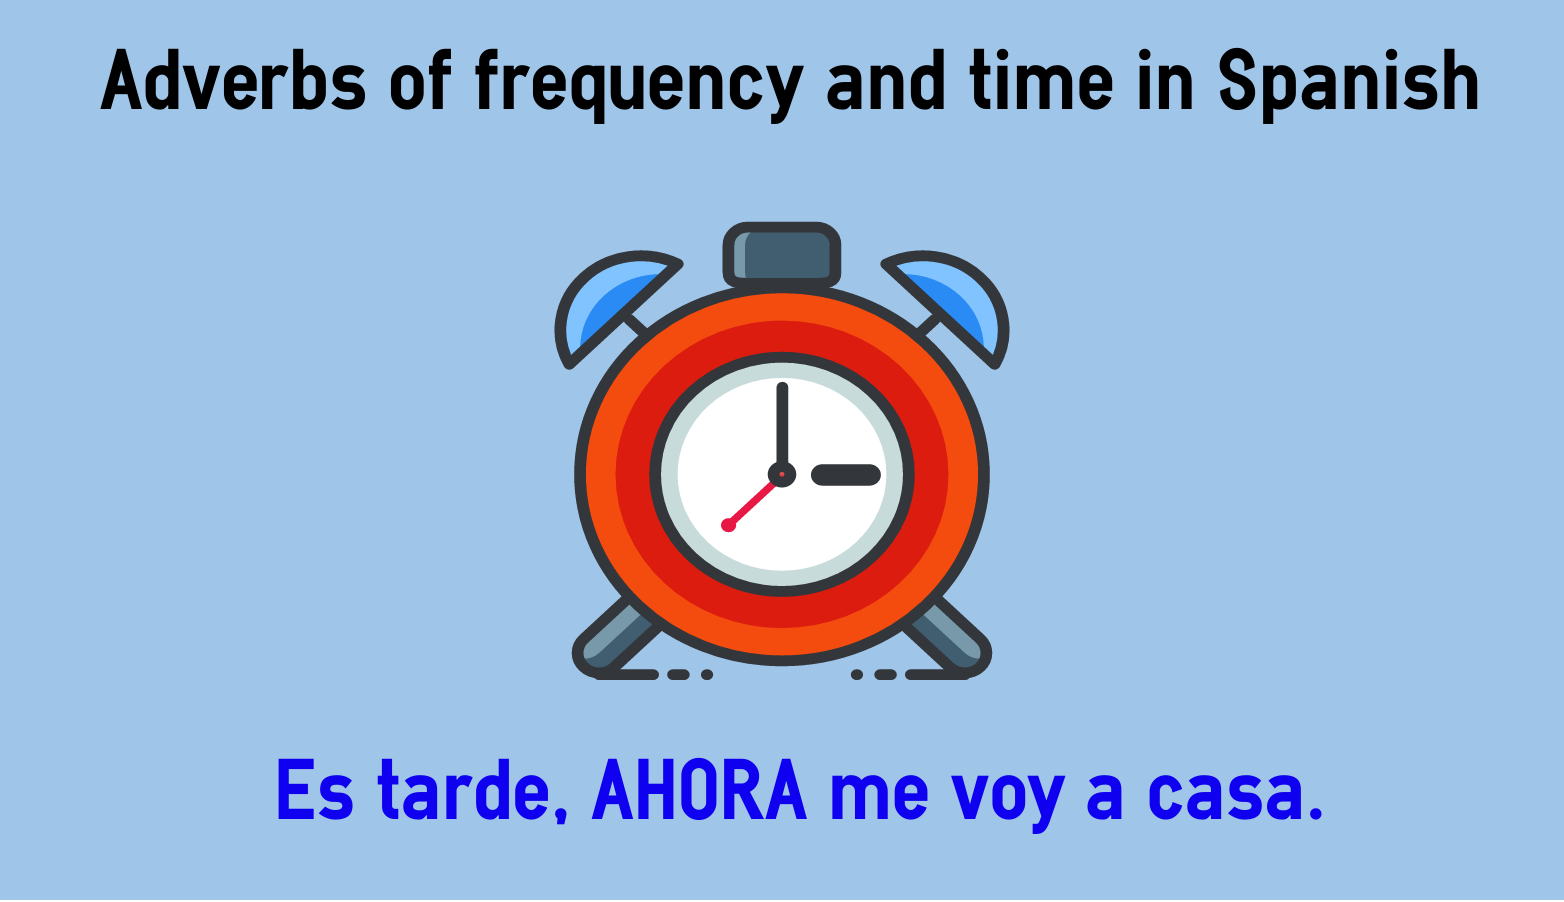 adverbs-of-frequency-and-time-in-spanish-ahora